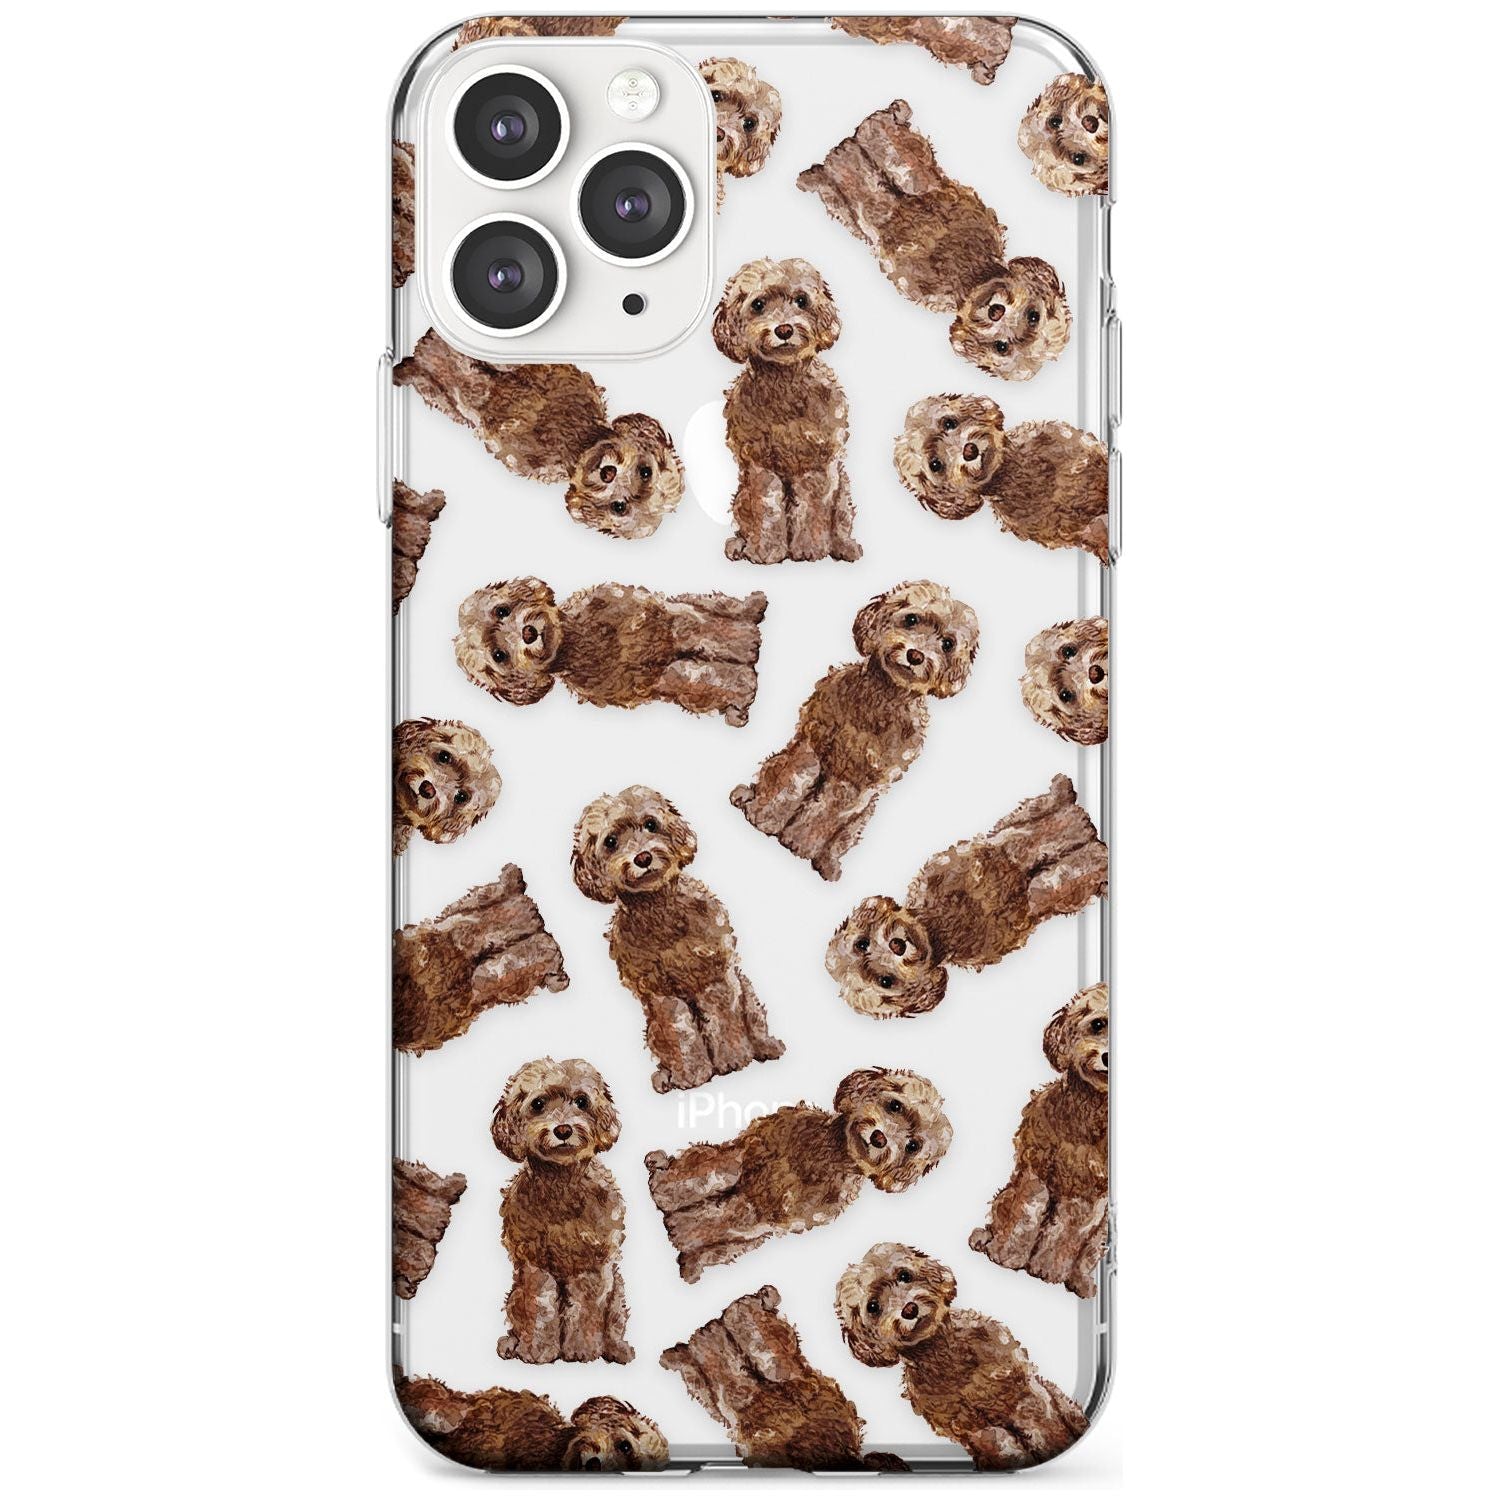 Cockapoo (Brown) Watercolour Dog Pattern Slim TPU Phone Case for iPhone 11 Pro Max